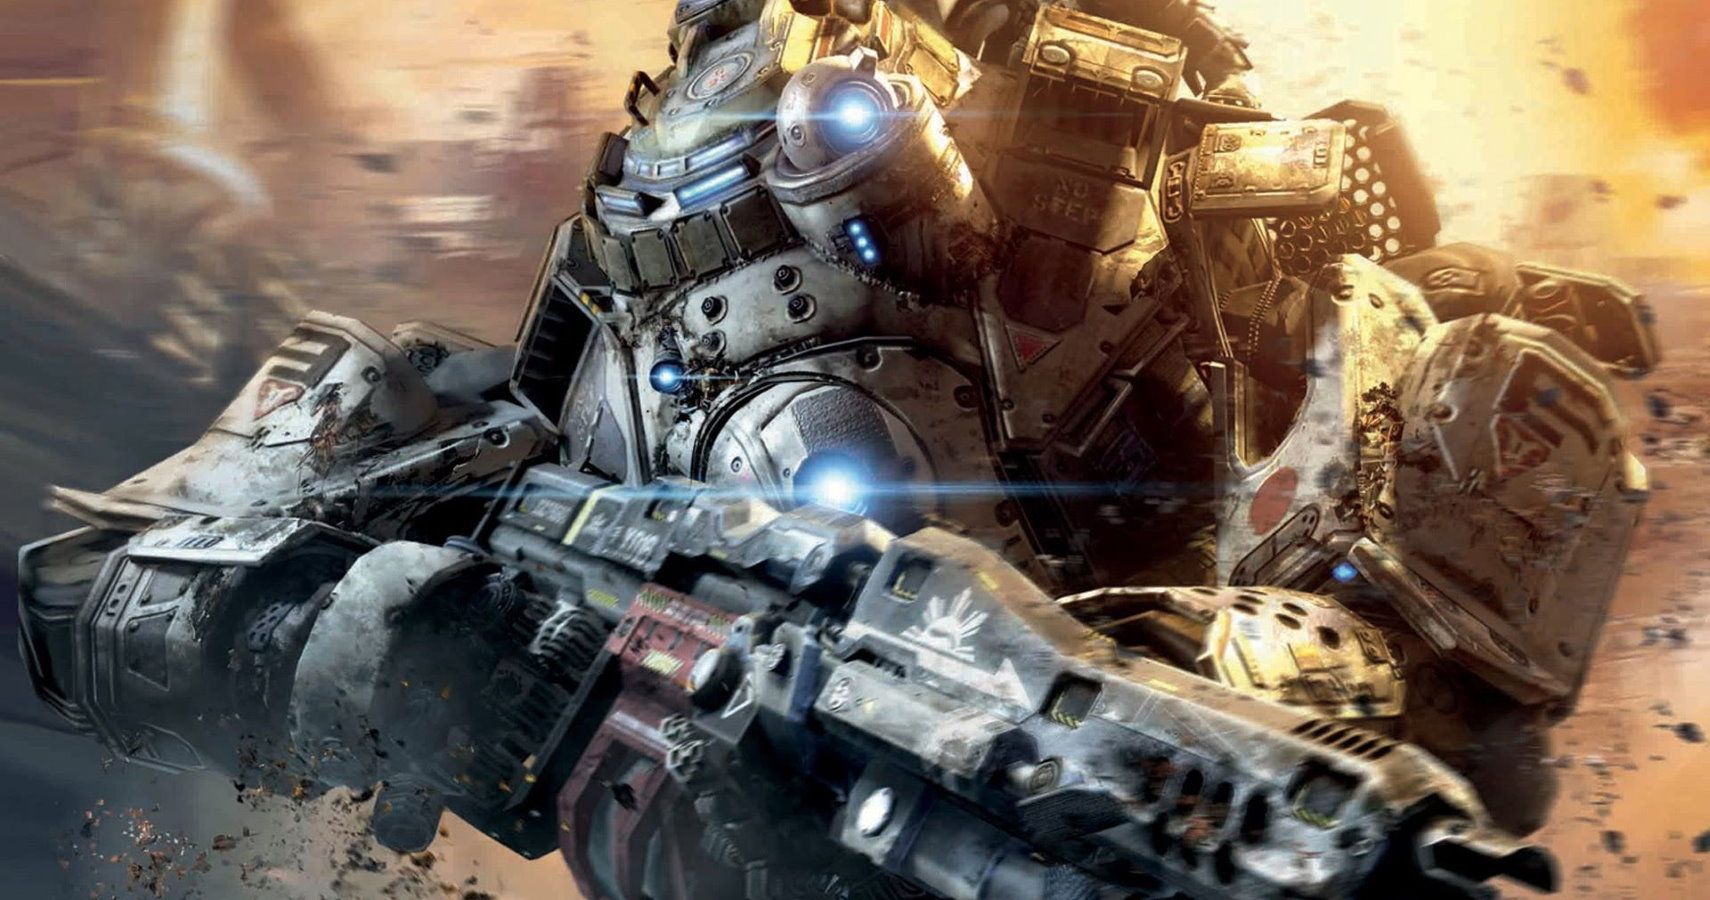 The Northstar Mod is Titanfall 2's Second Lease On Multiplayer Life